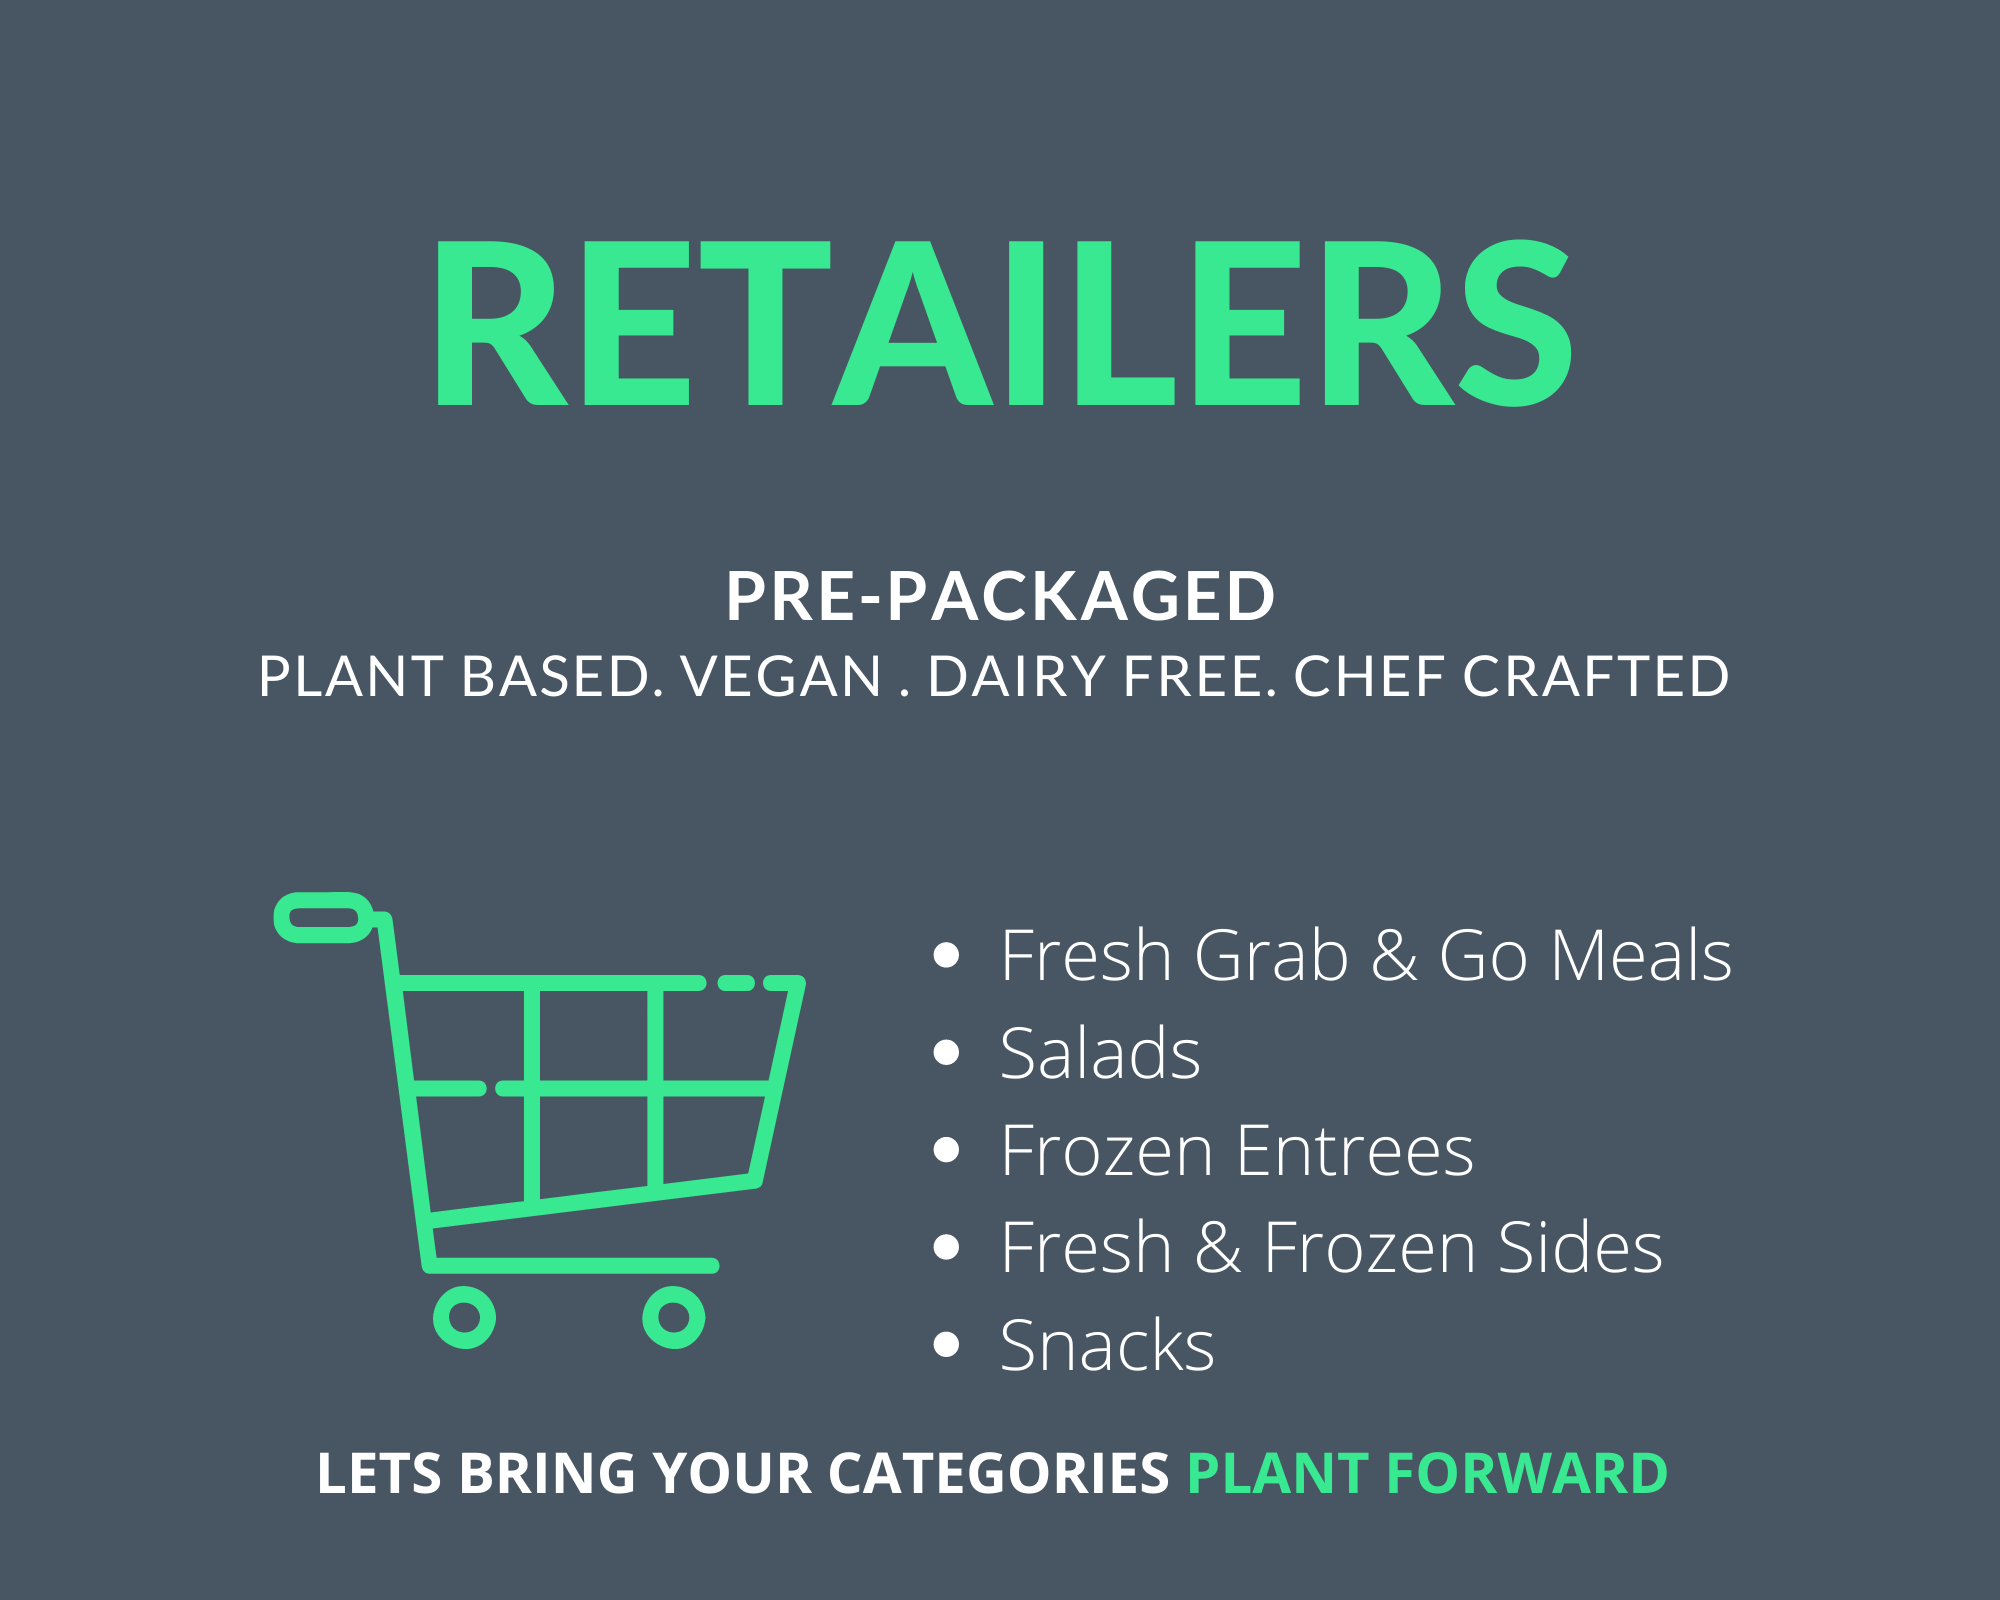 Plant Based Products for Retailers